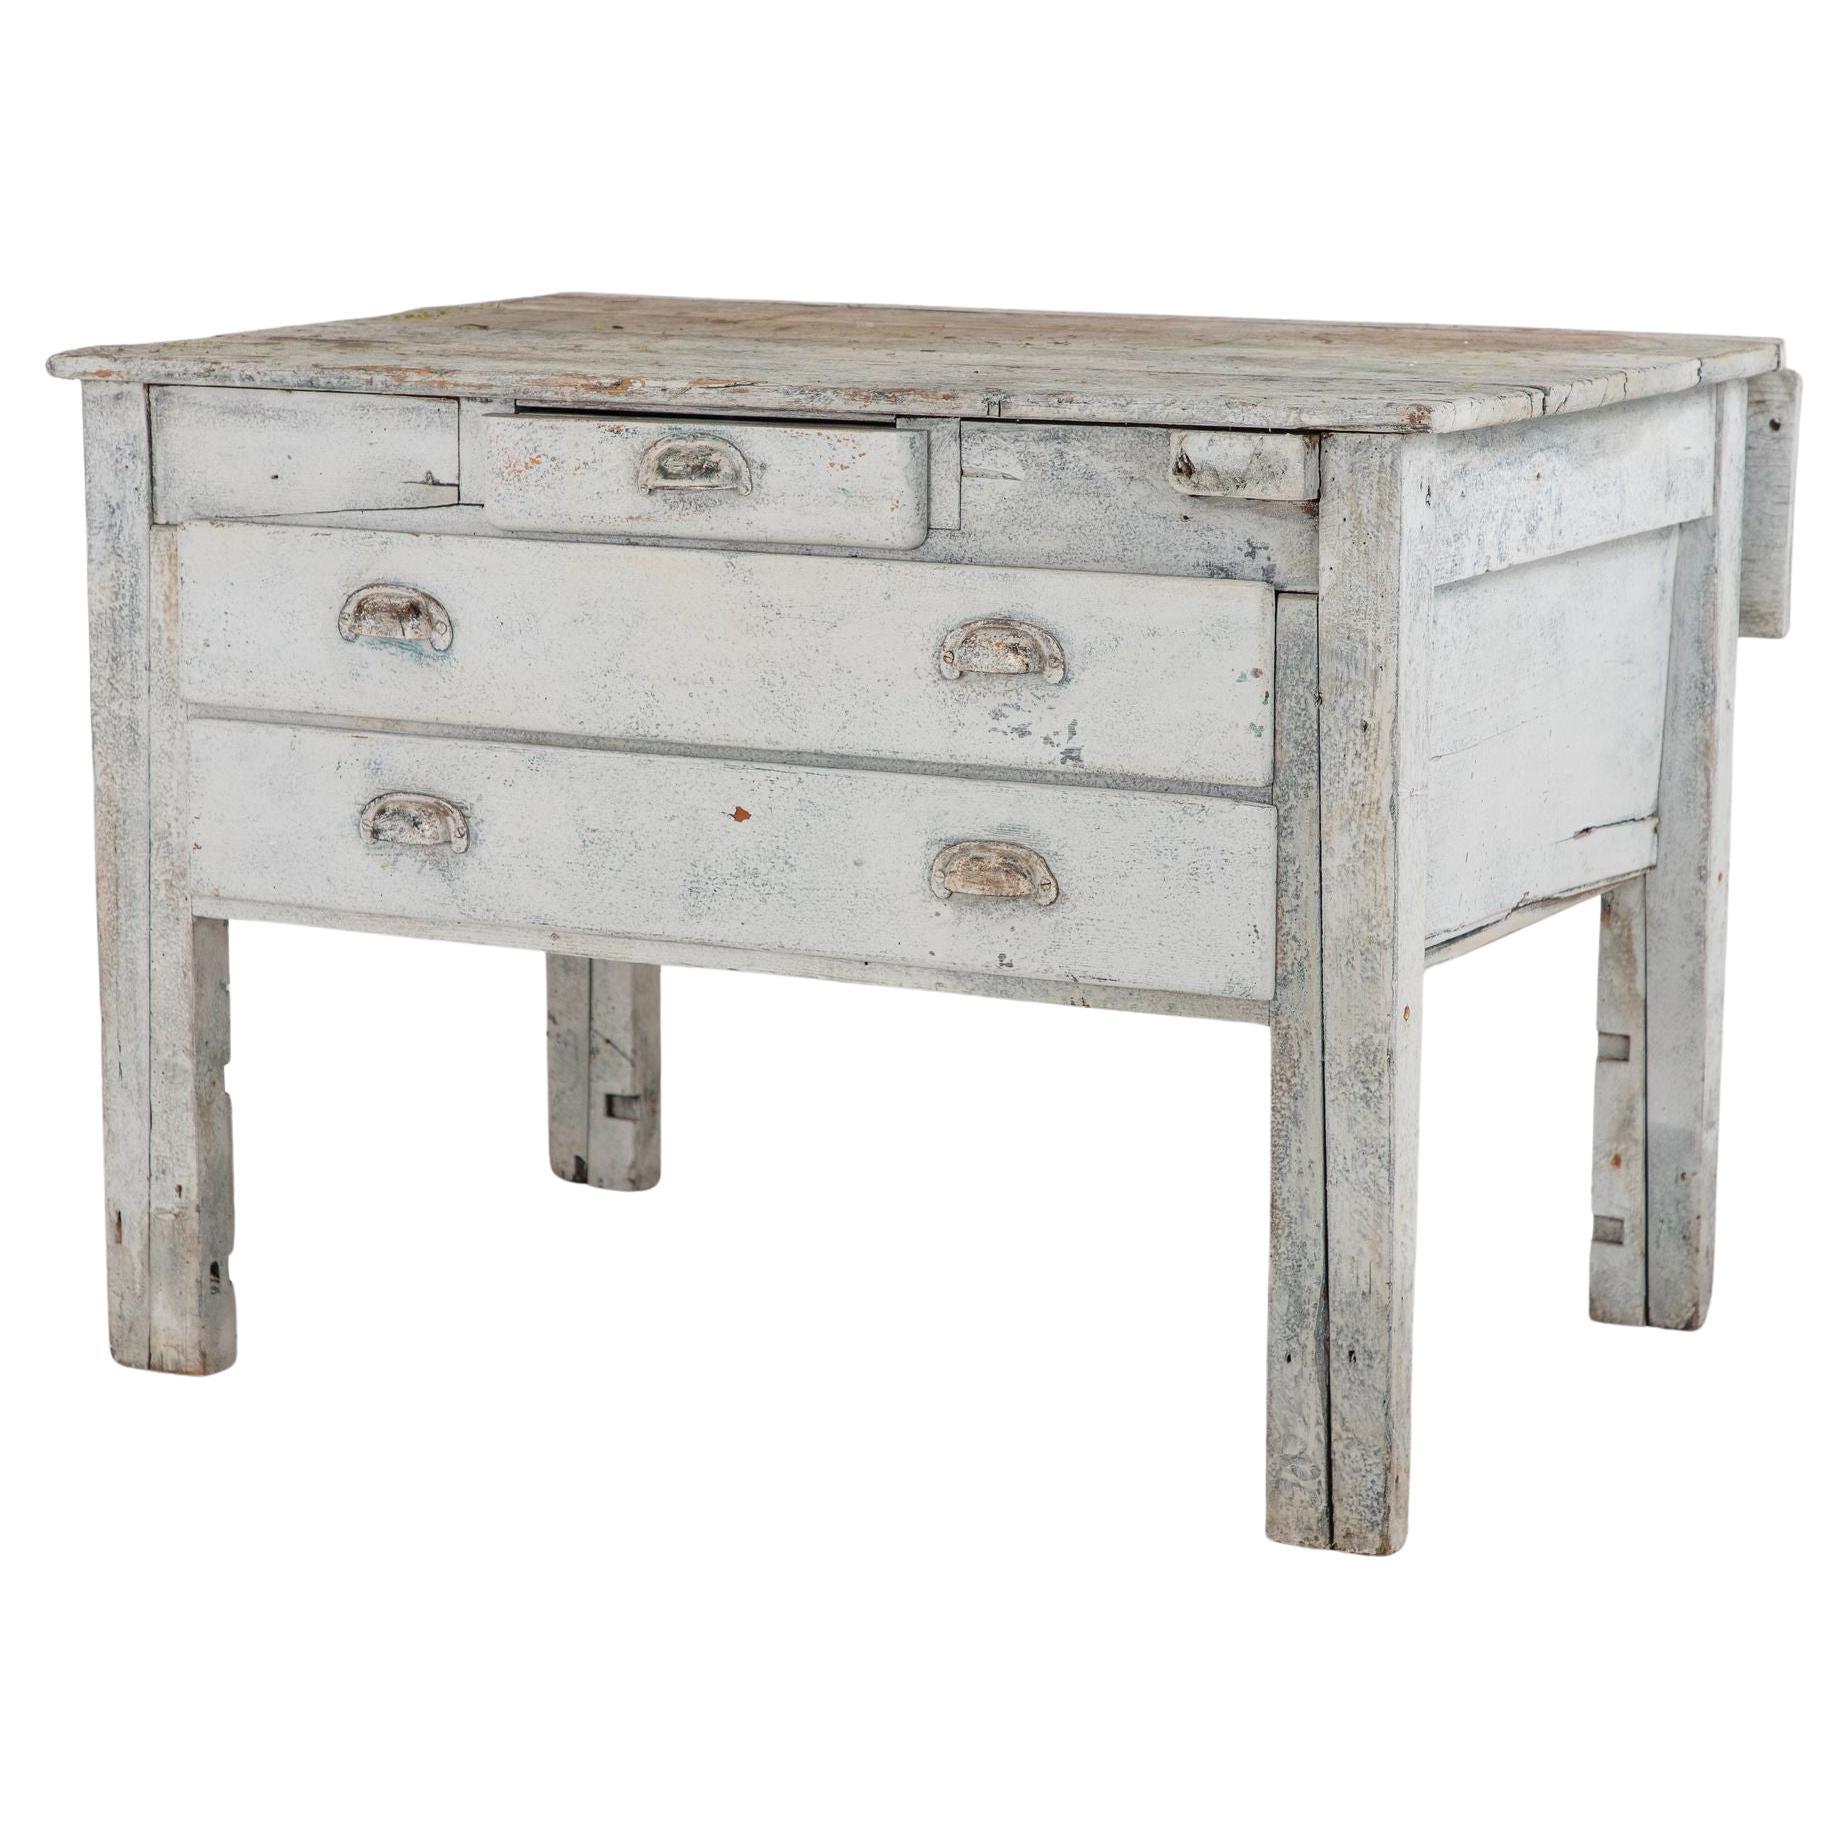 19th Century European Gray Painted Workbench For Sale